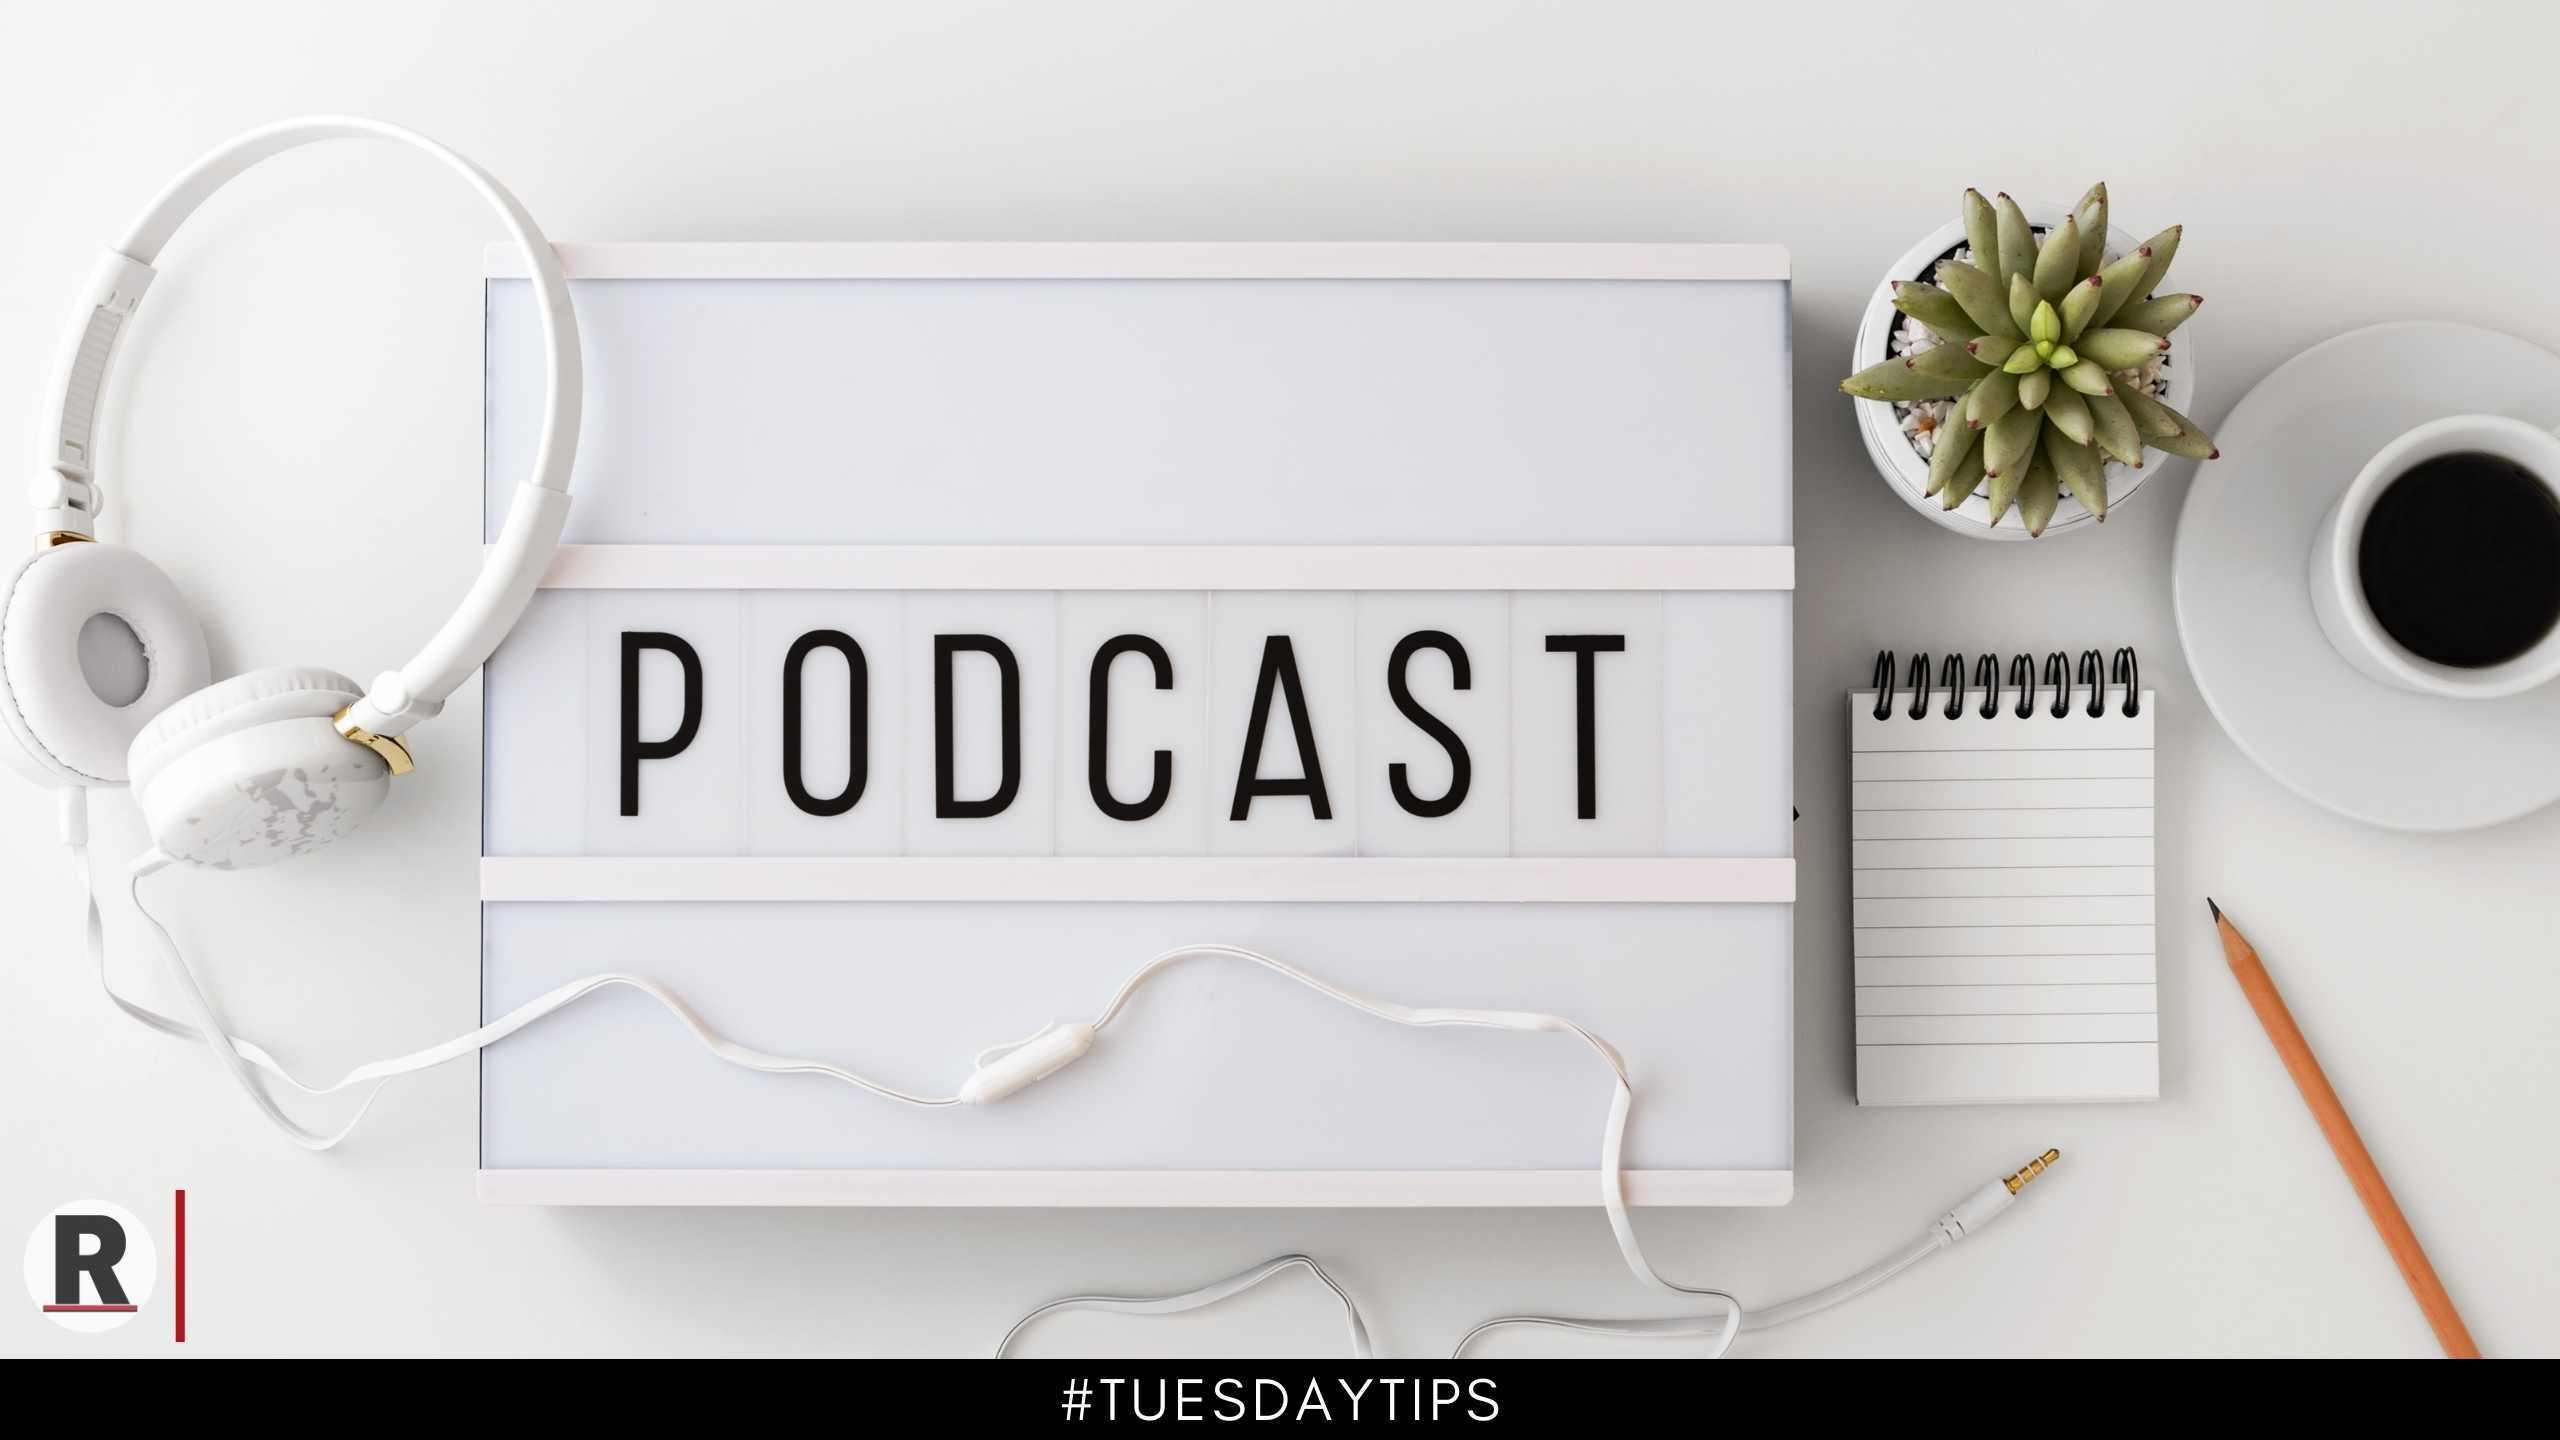 TUESDAY TIPS: NoVA Podcasts You Should Be Listening To